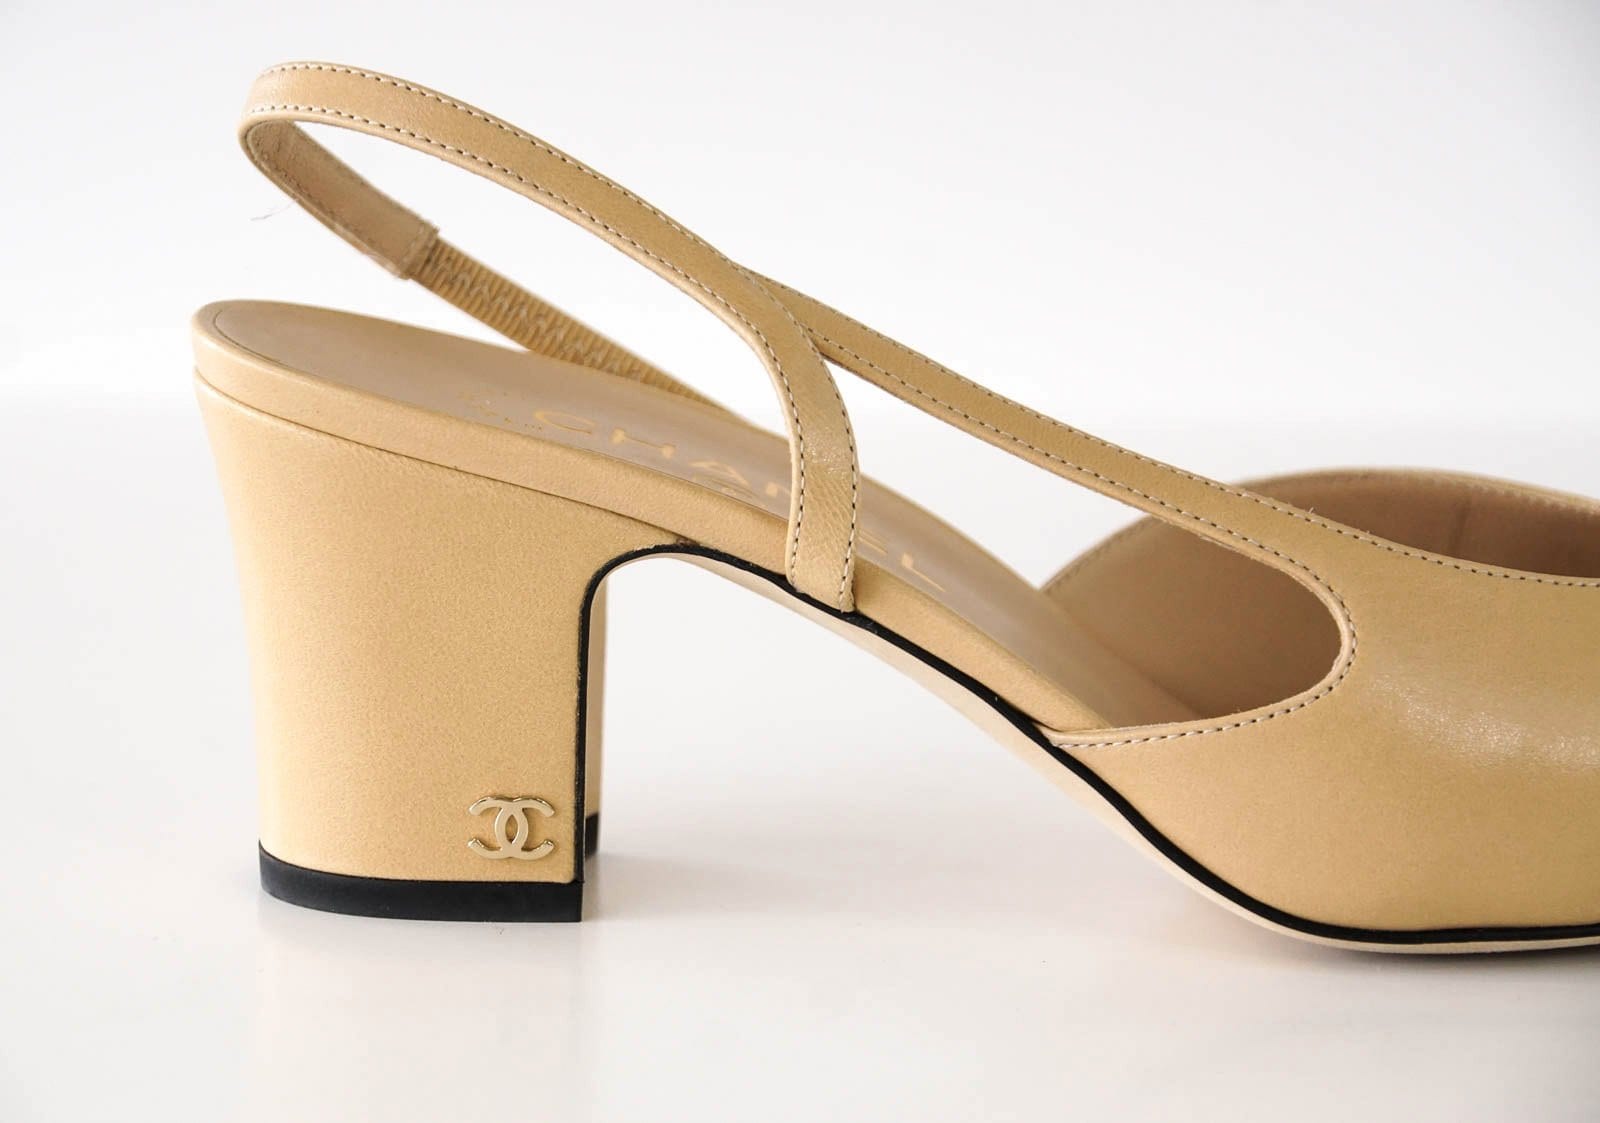 Chanel Shoe Mademoiselle Leather Camel Black Grosgrain 39.5 / 9.5 - mightychic